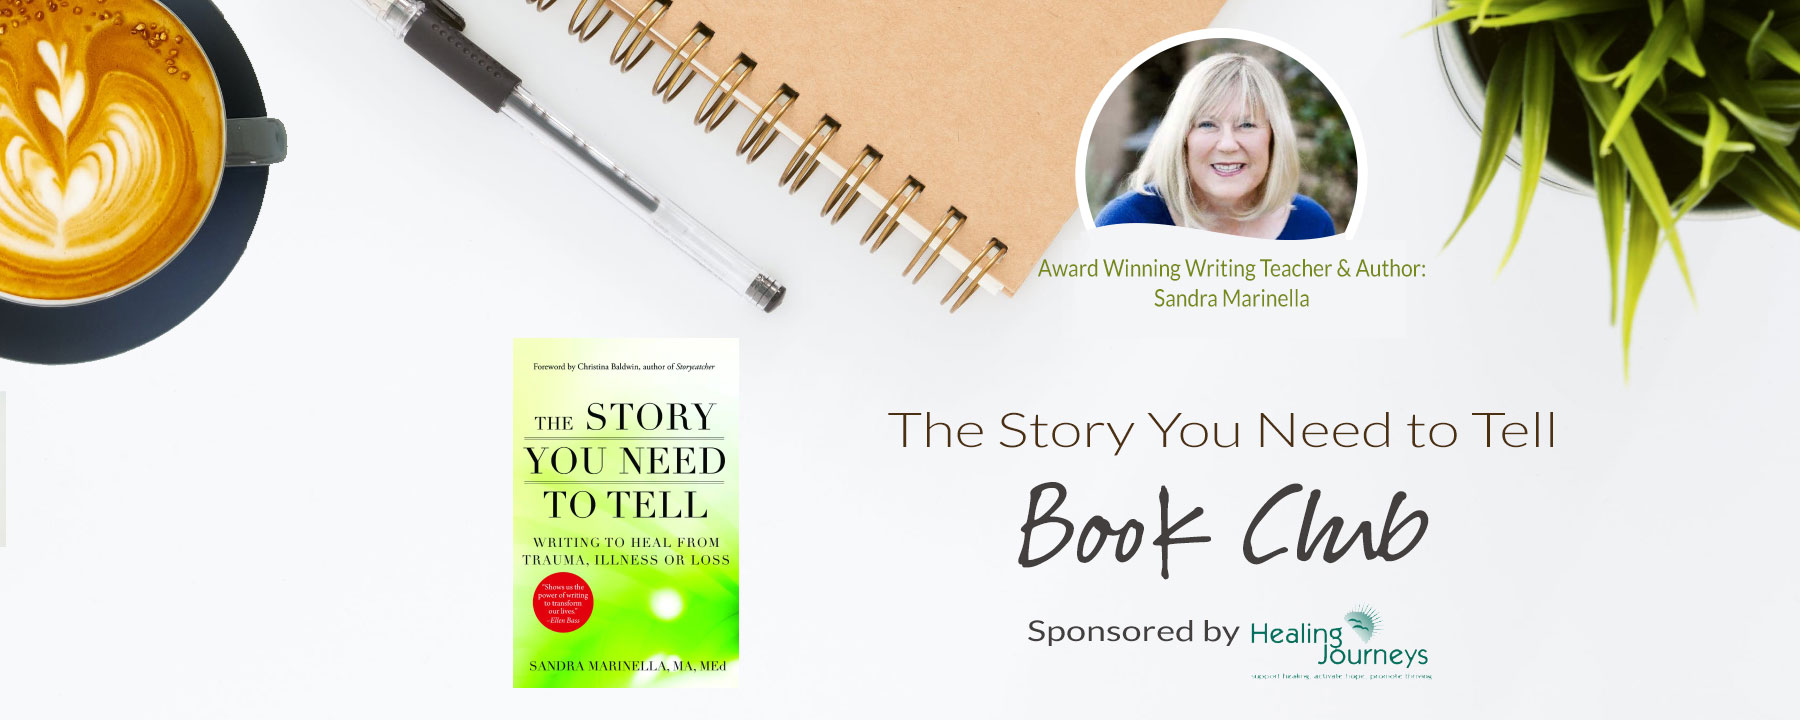 Story You Need to Tell Book Club, Healing Journeys